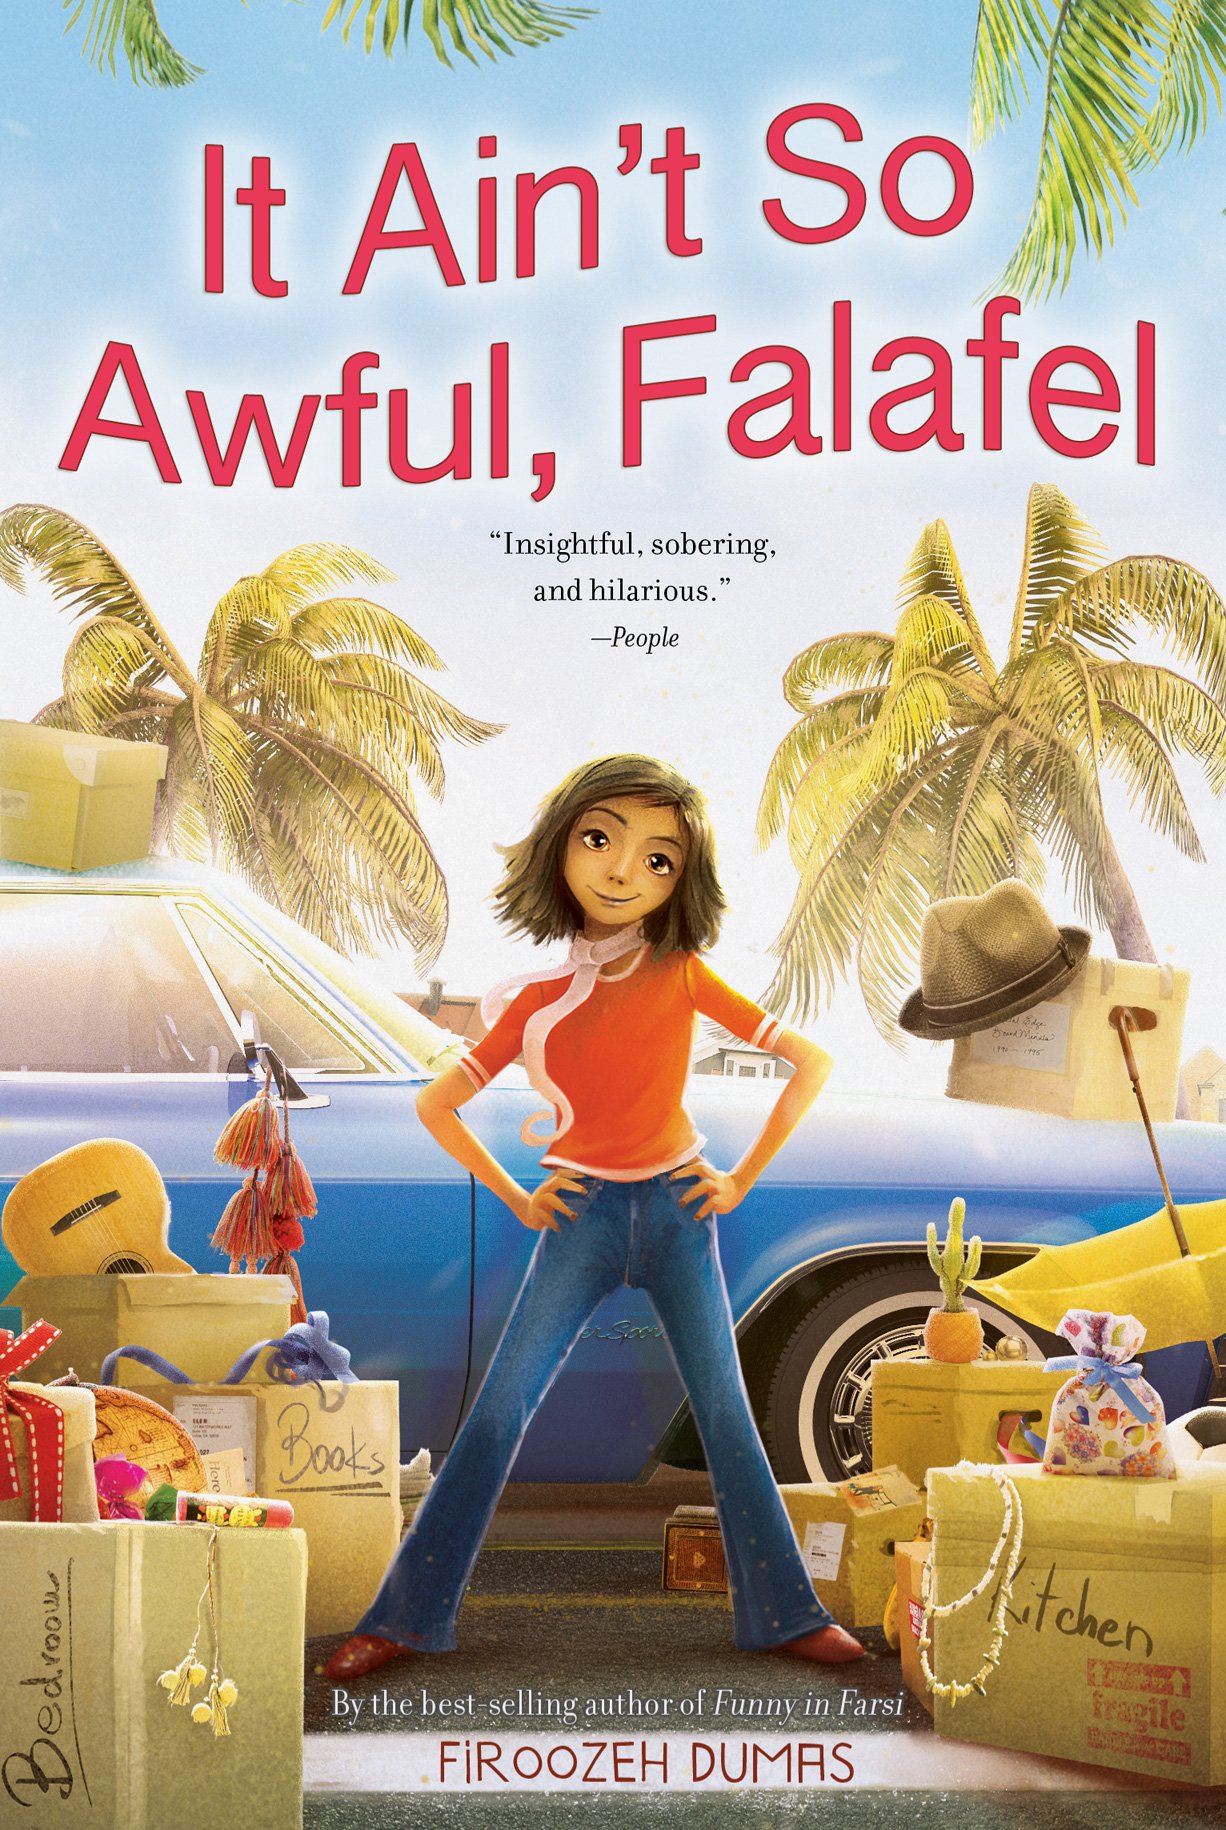 It Ain't So Awful, Falafel book jacket